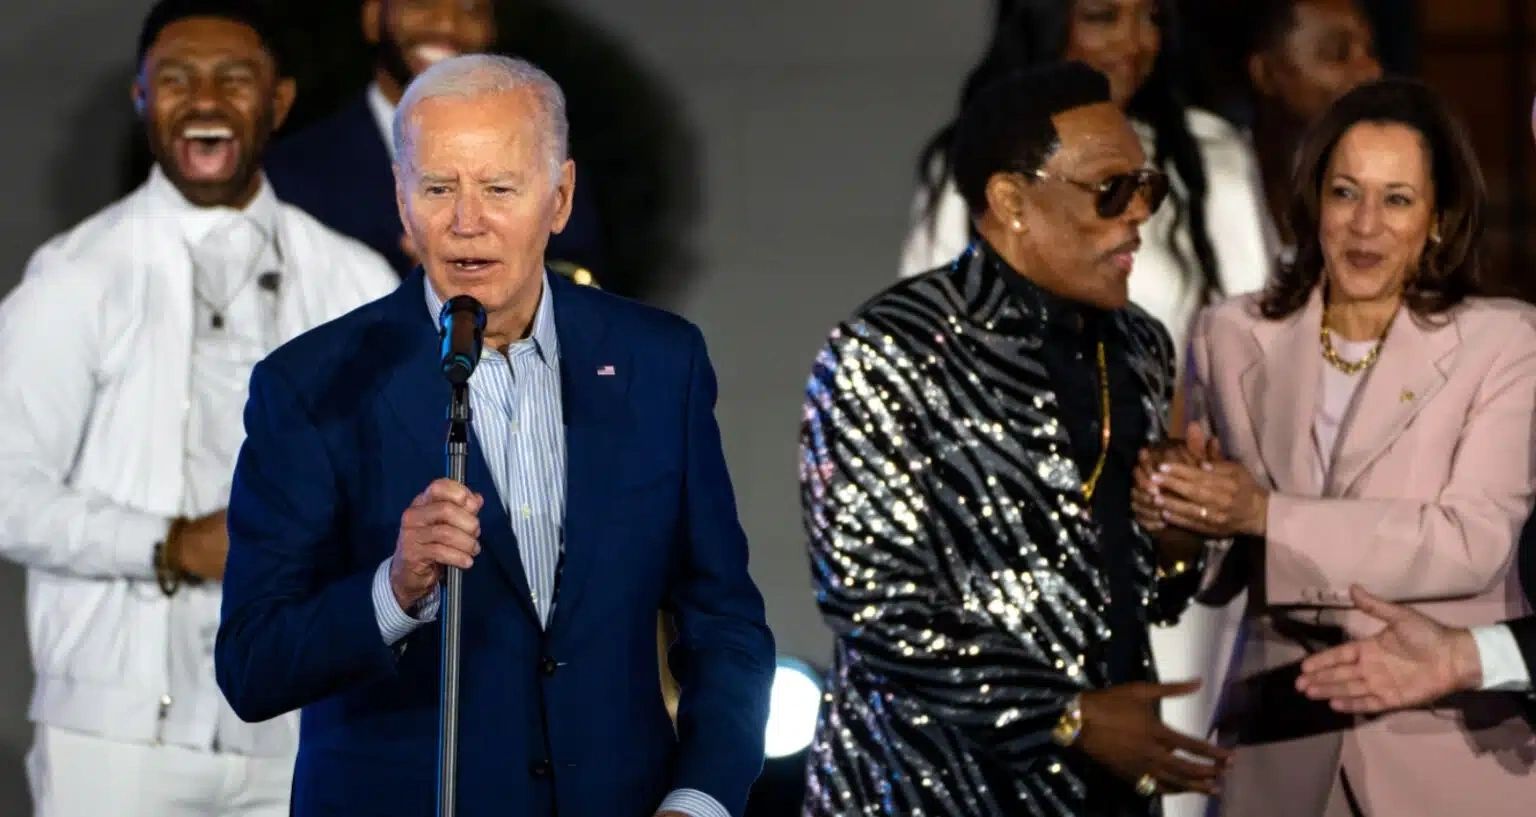 New Video Of Biden At Event Raises New Serious Concerns